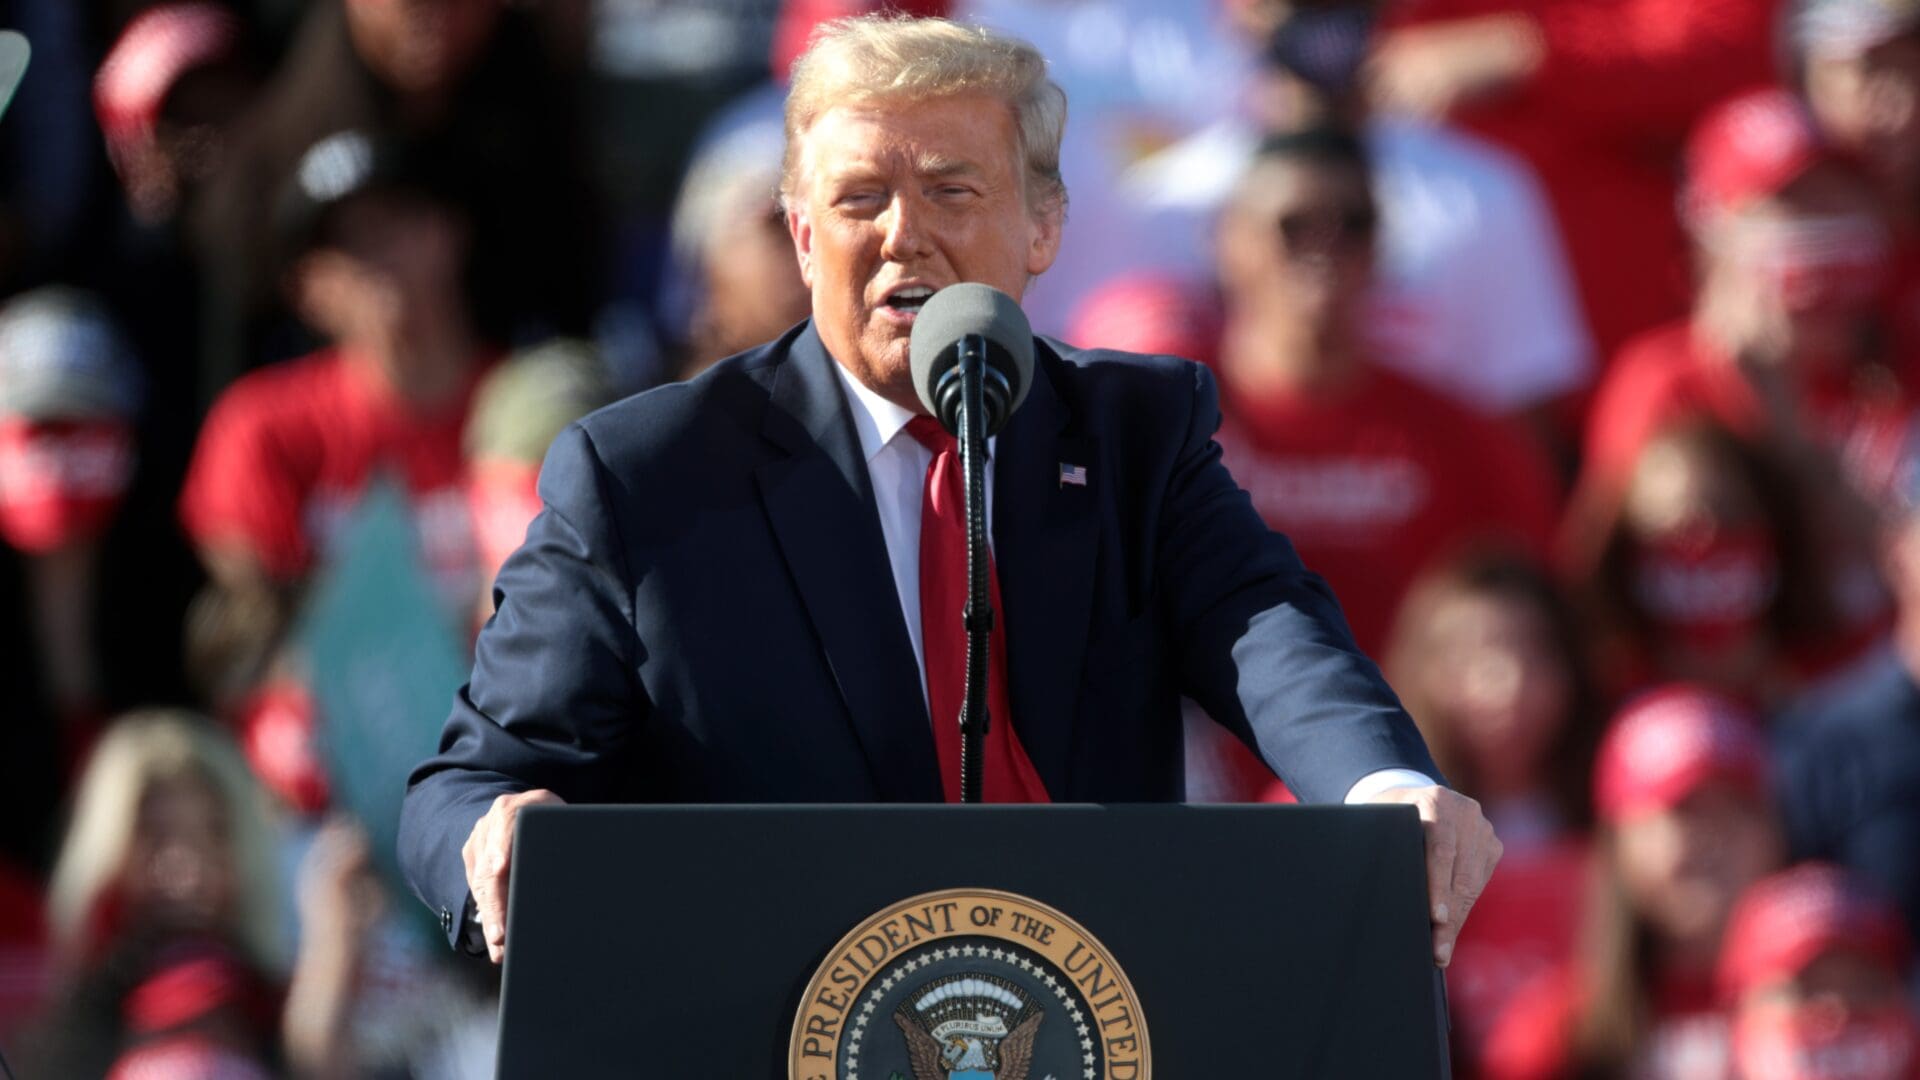 President Donald Trump speaking at a campaign rally at Phoenix Goodyear Airport in Goodyear, Arizona on 28 October 2020.